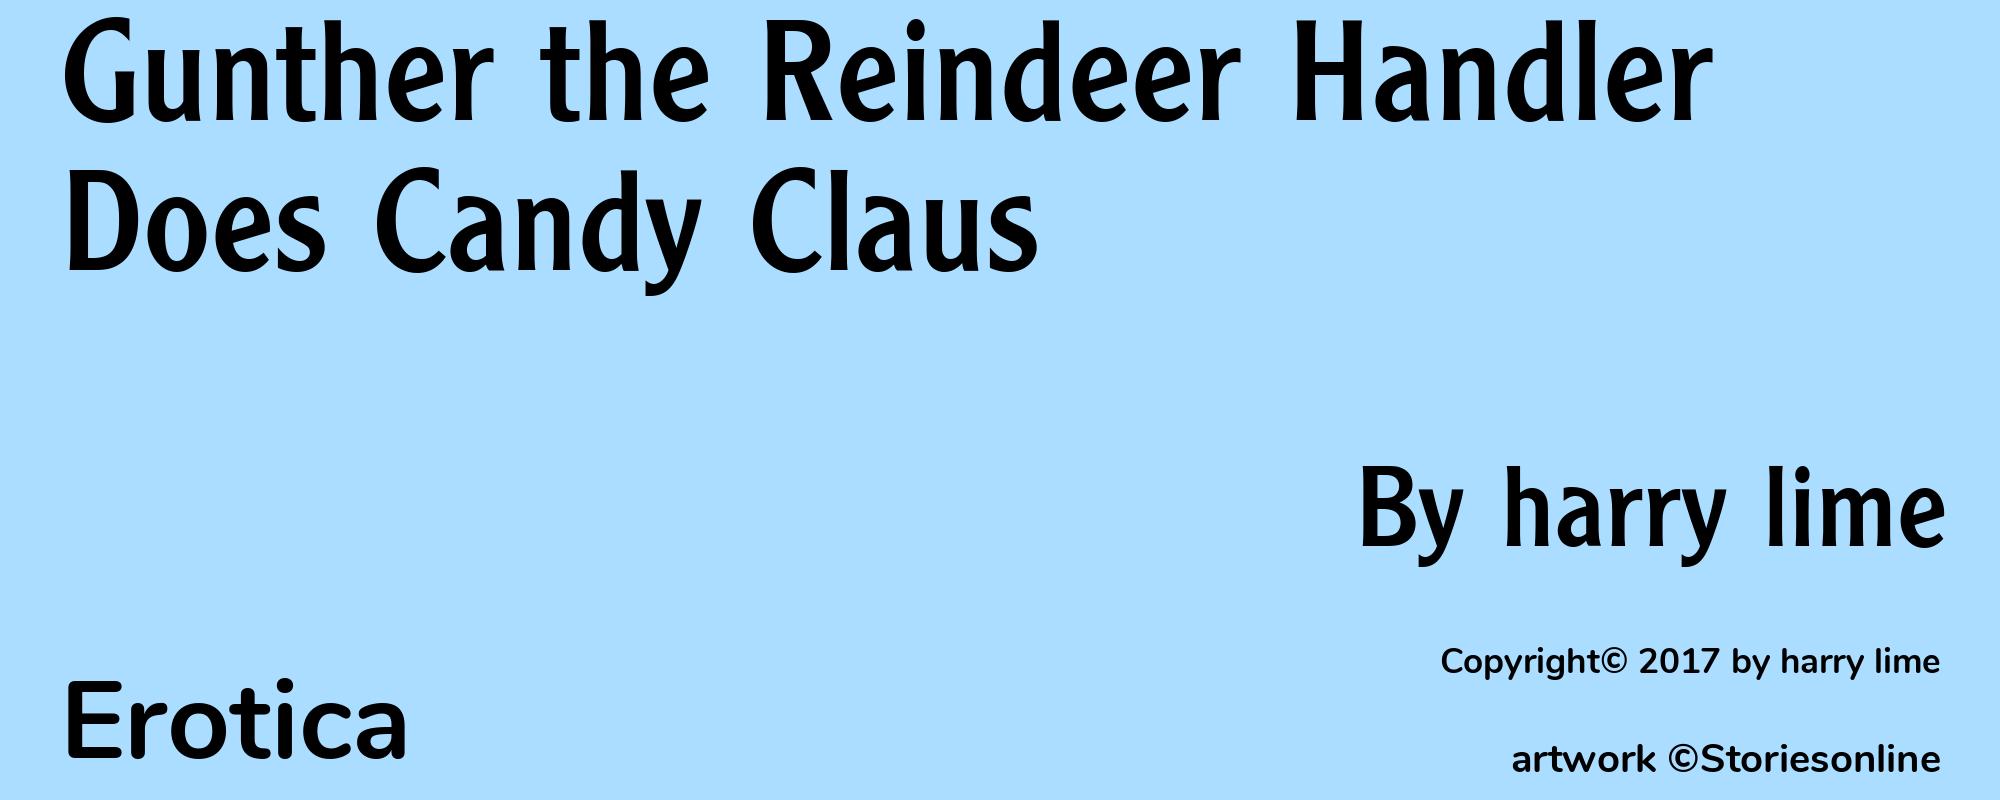 Gunther the Reindeer Handler Does Candy Claus - Cover